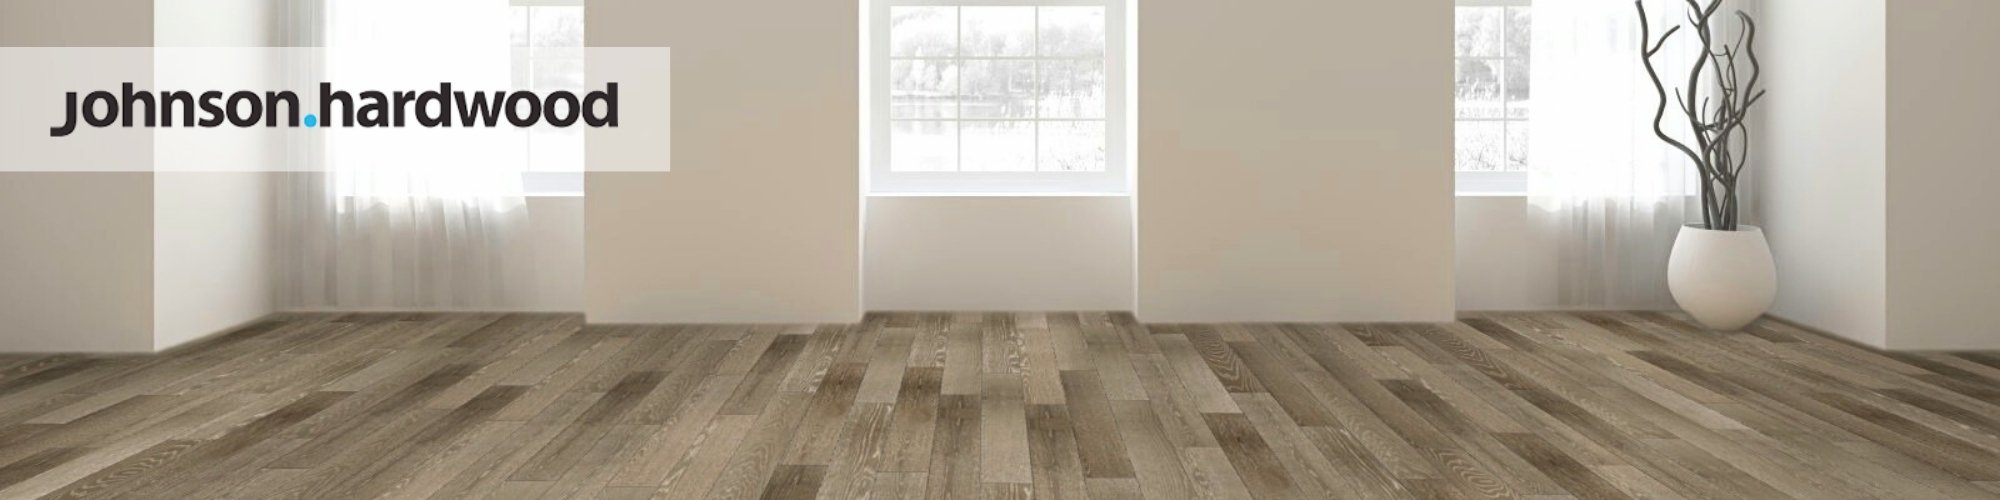 Nielson Fine Floors and Johnson Hardwood Flooring Products